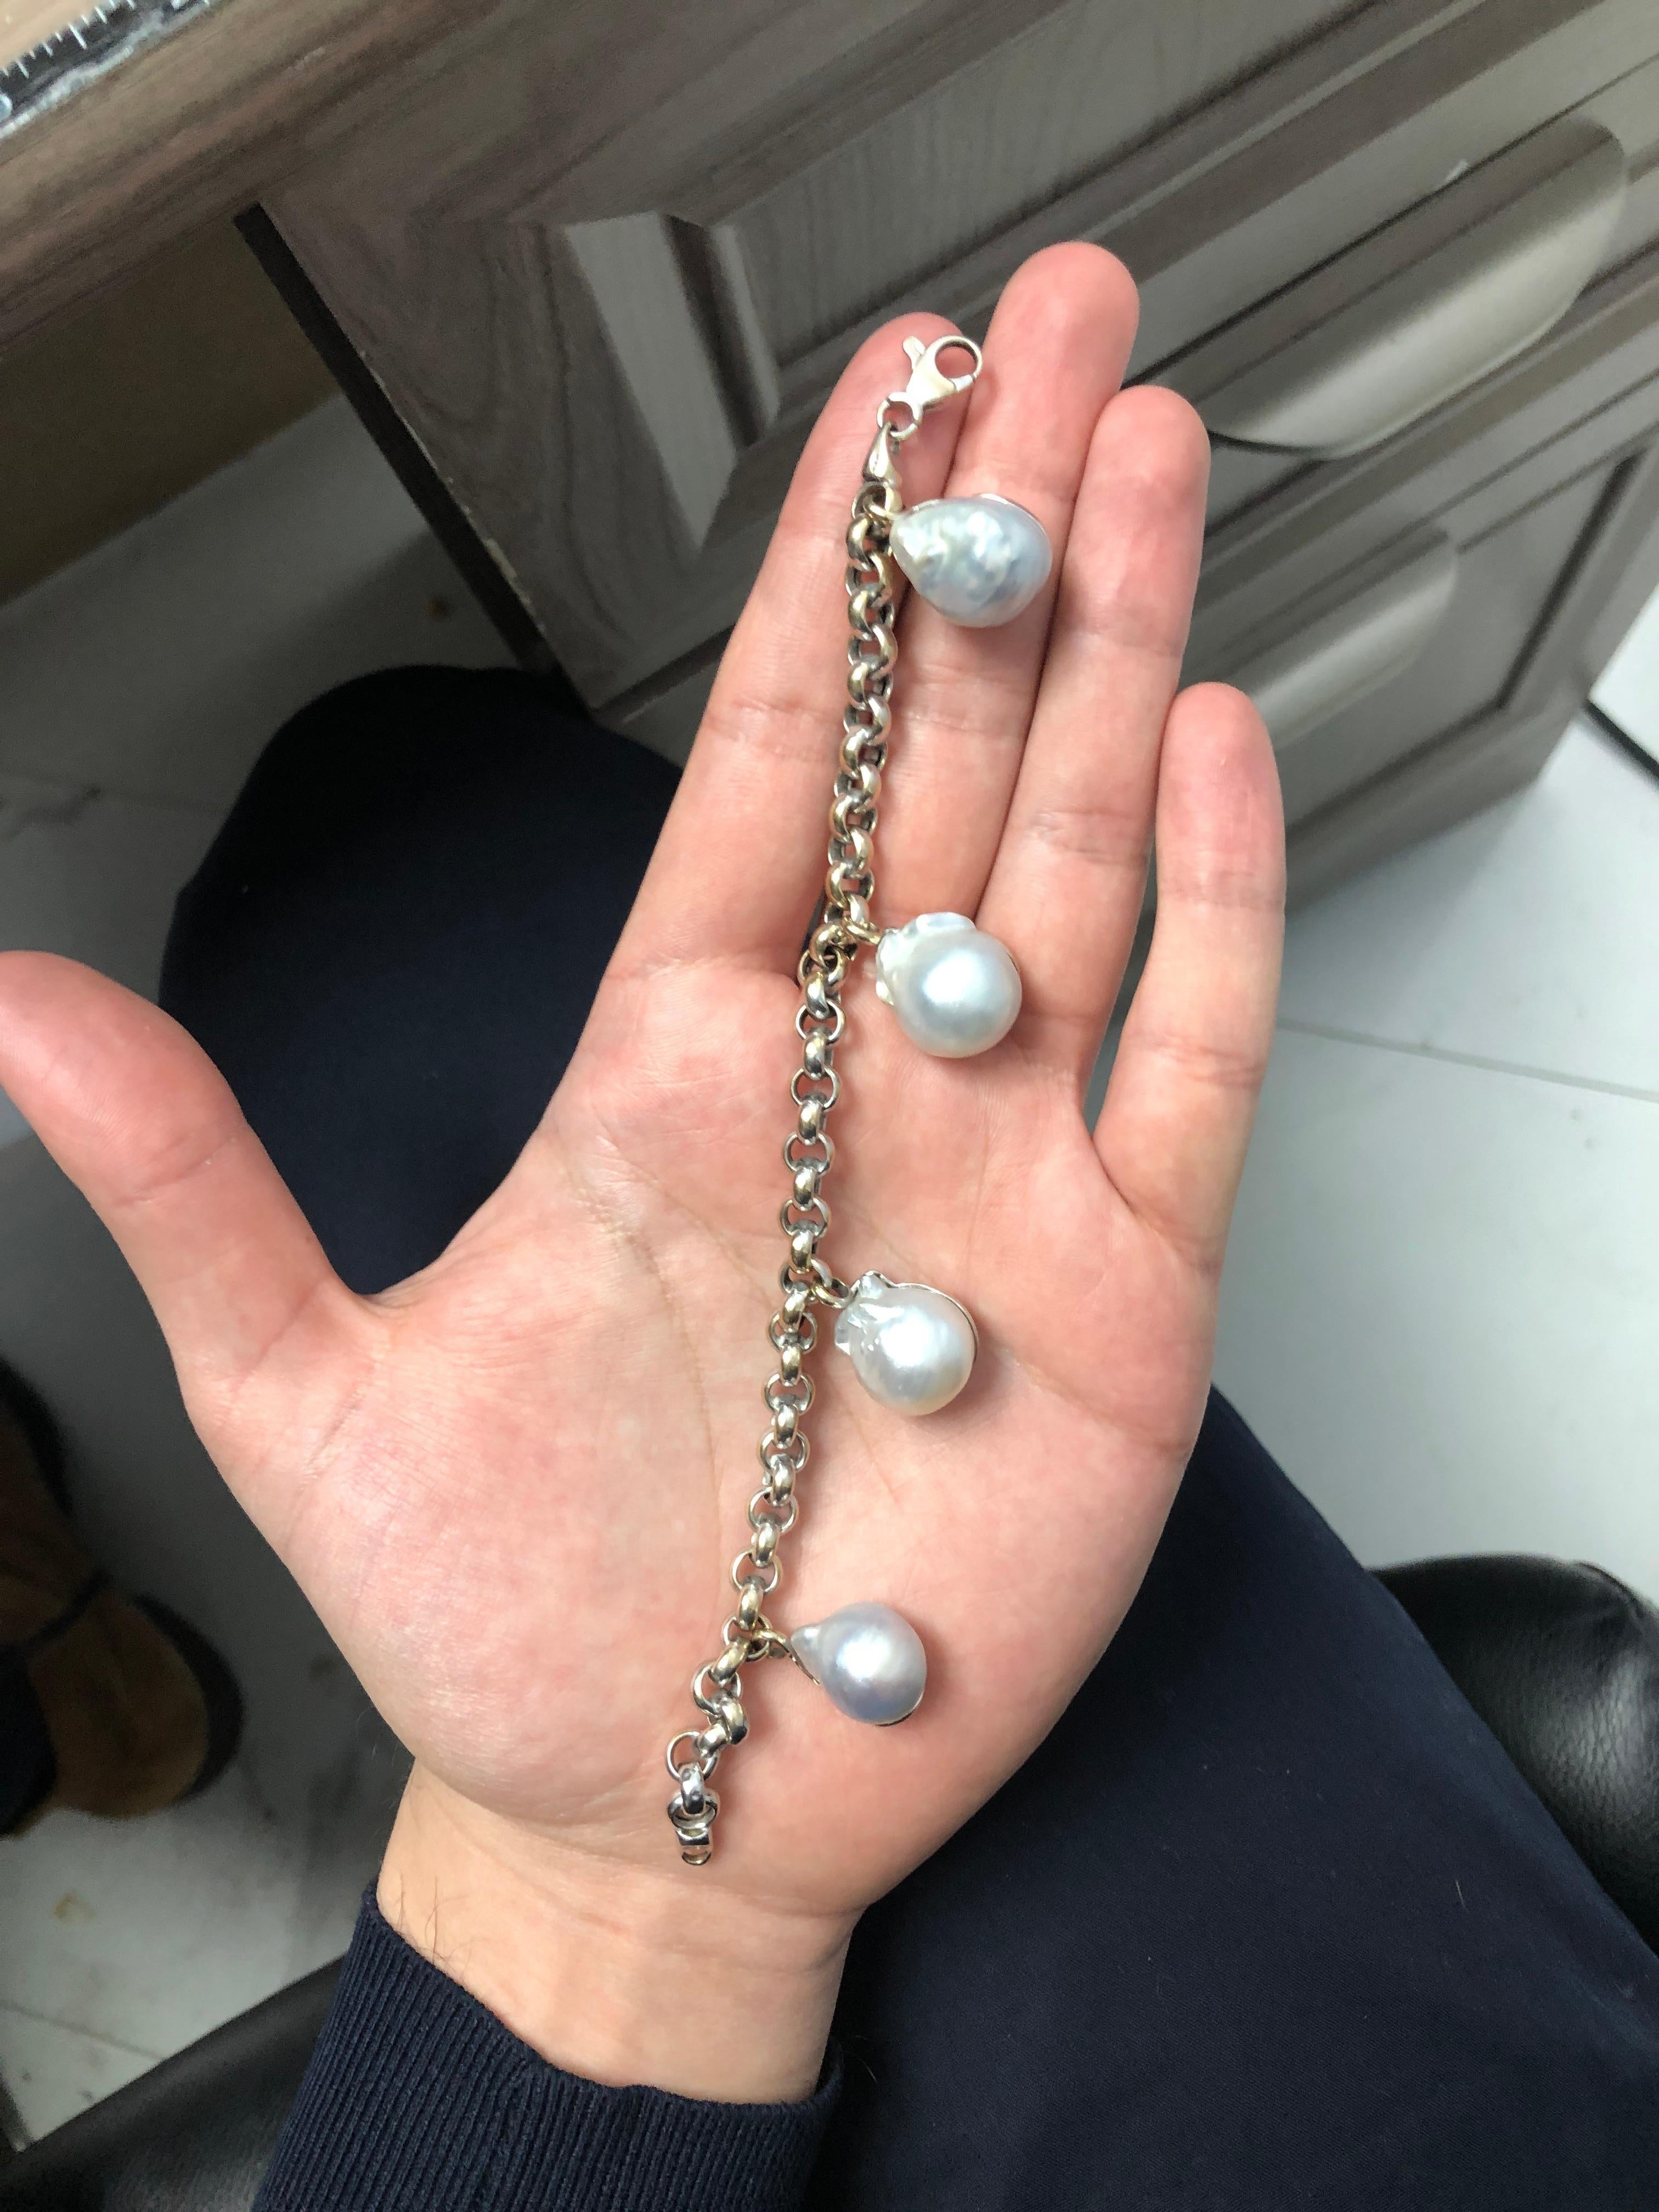 A vintage 18K white gold link bracelet consisting of 4 baroque South Sea cultured pearls measuring 16.60 x 12.90 mm - 18.38 x 15.27 mm. 
Pearl Color: White, Overtone: Rose, Luster: Good, Surface: Blemished

Stone: South Sea Cultured Pear

Metal: 18K